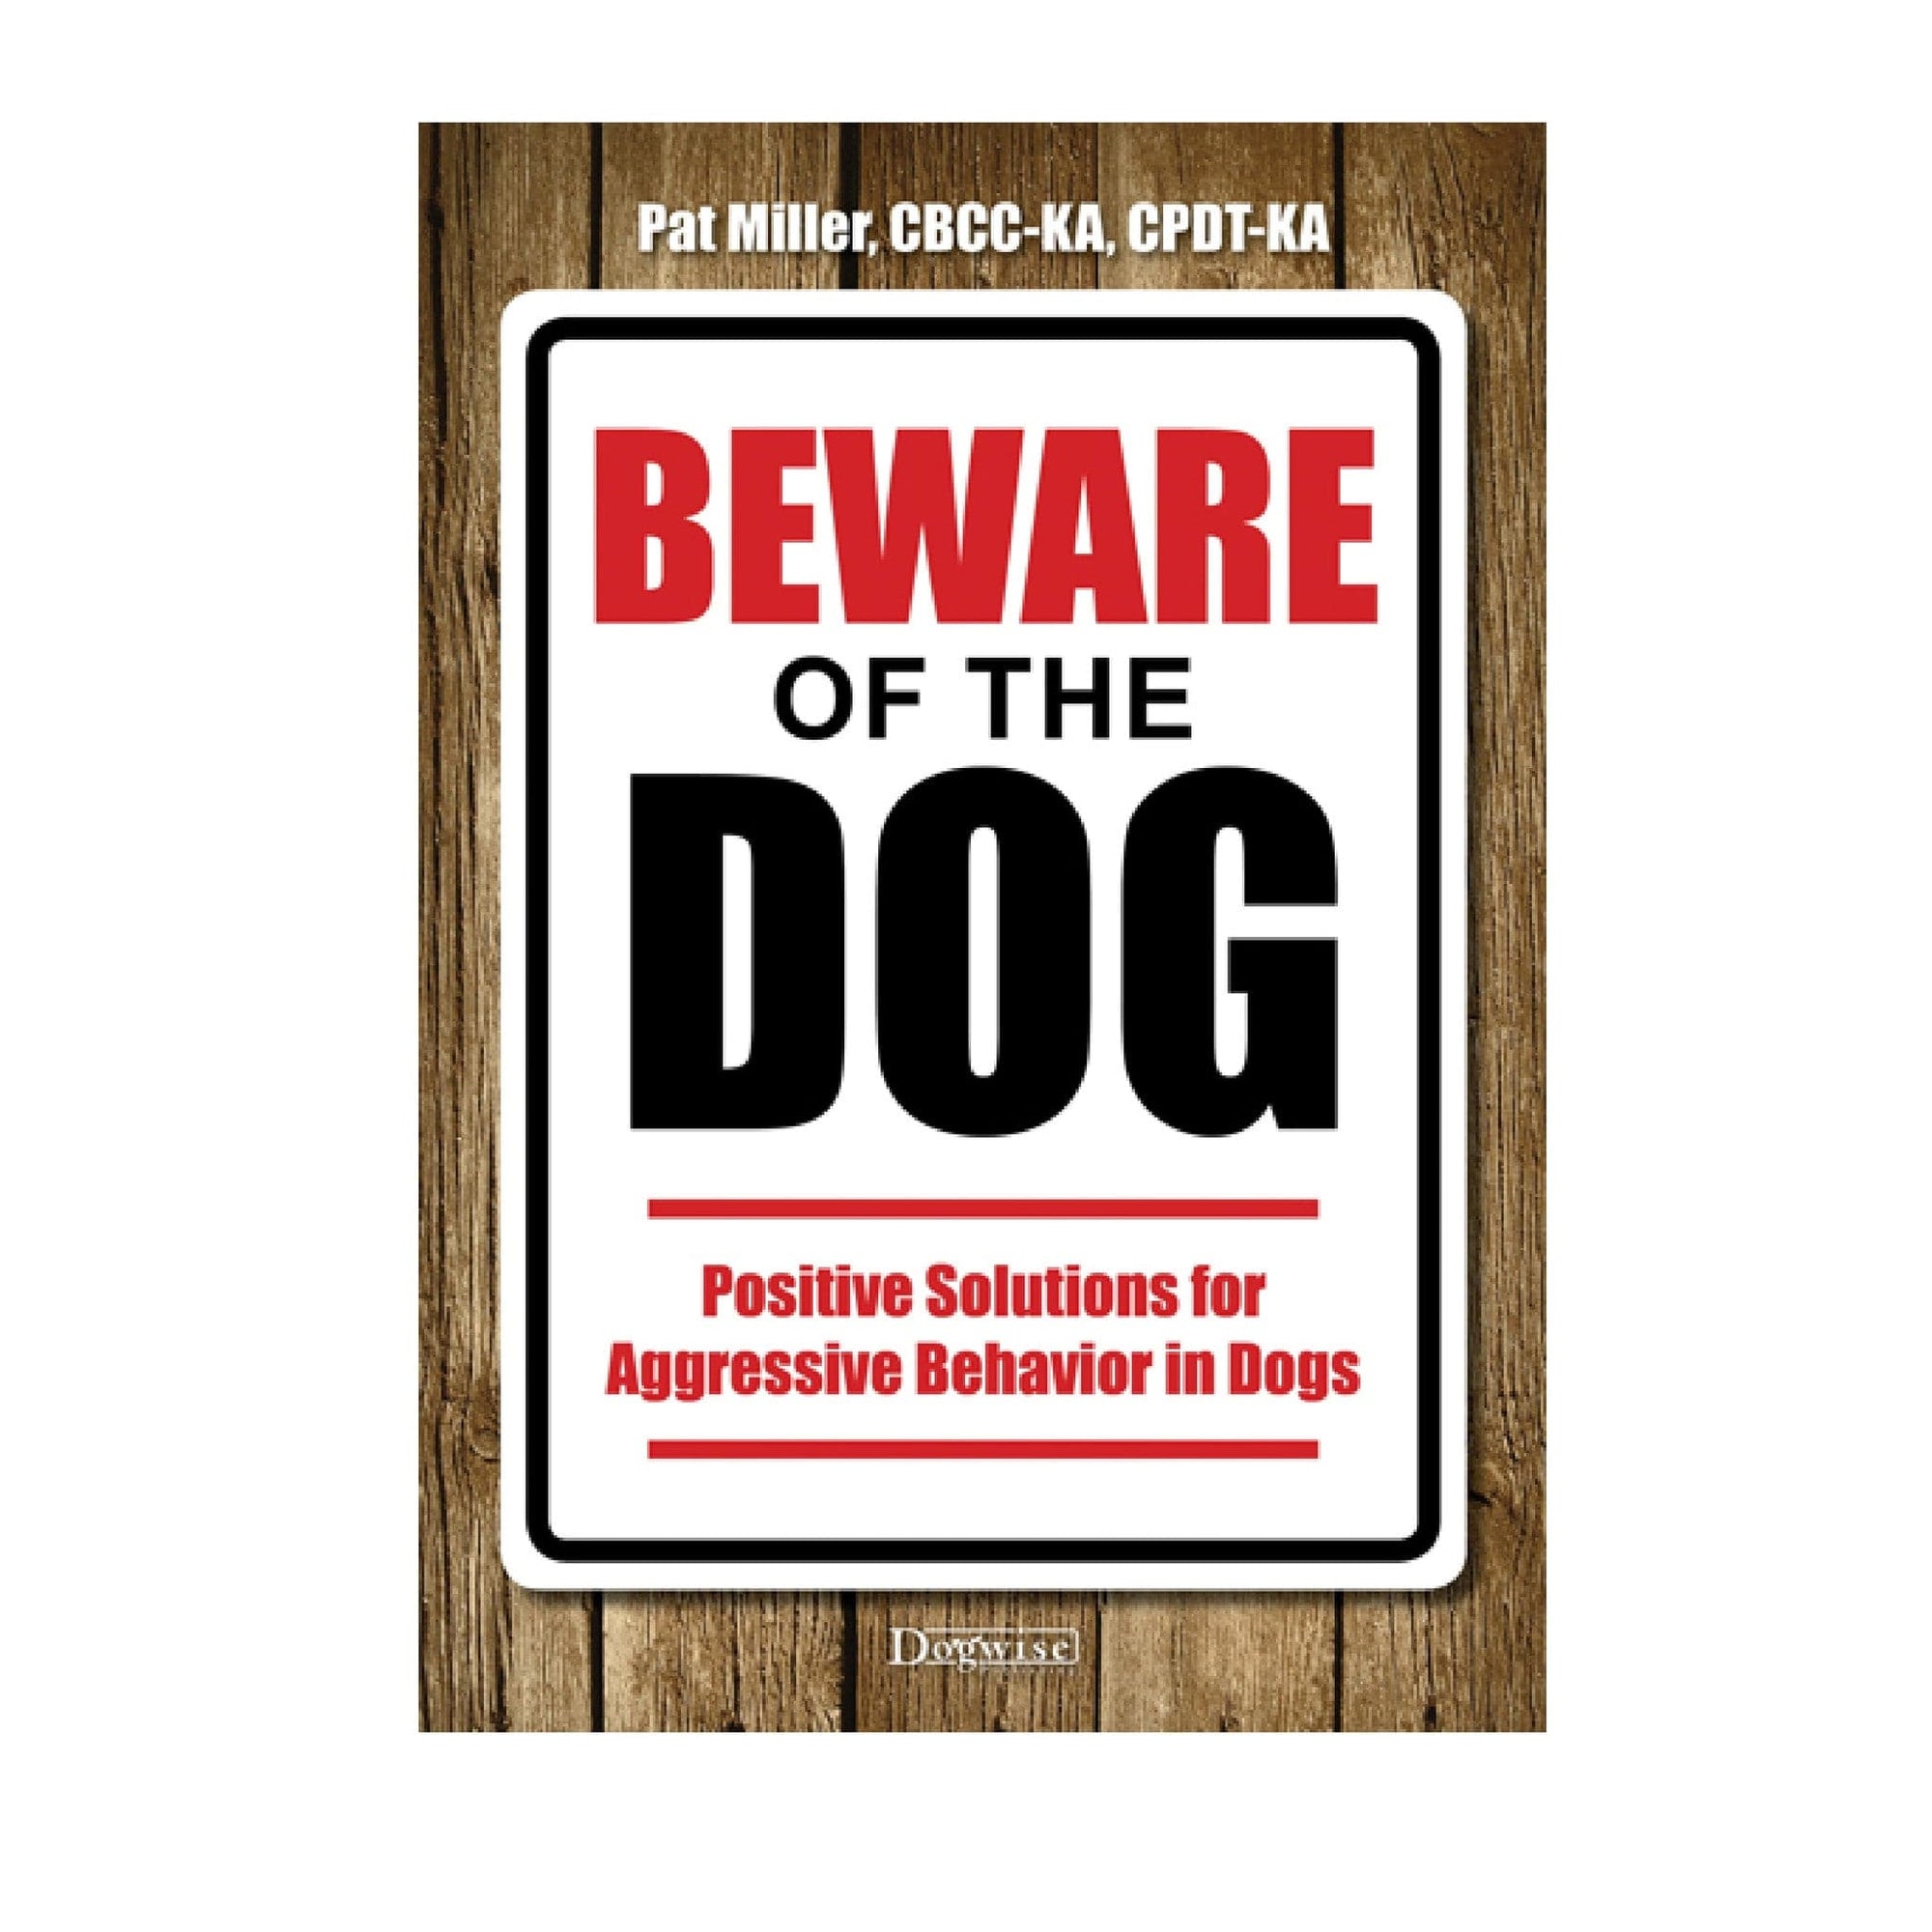 E-BOOK Beware of the Dog: Positive Solutions for Aggressive Behavior in Dogs by Pat Miller